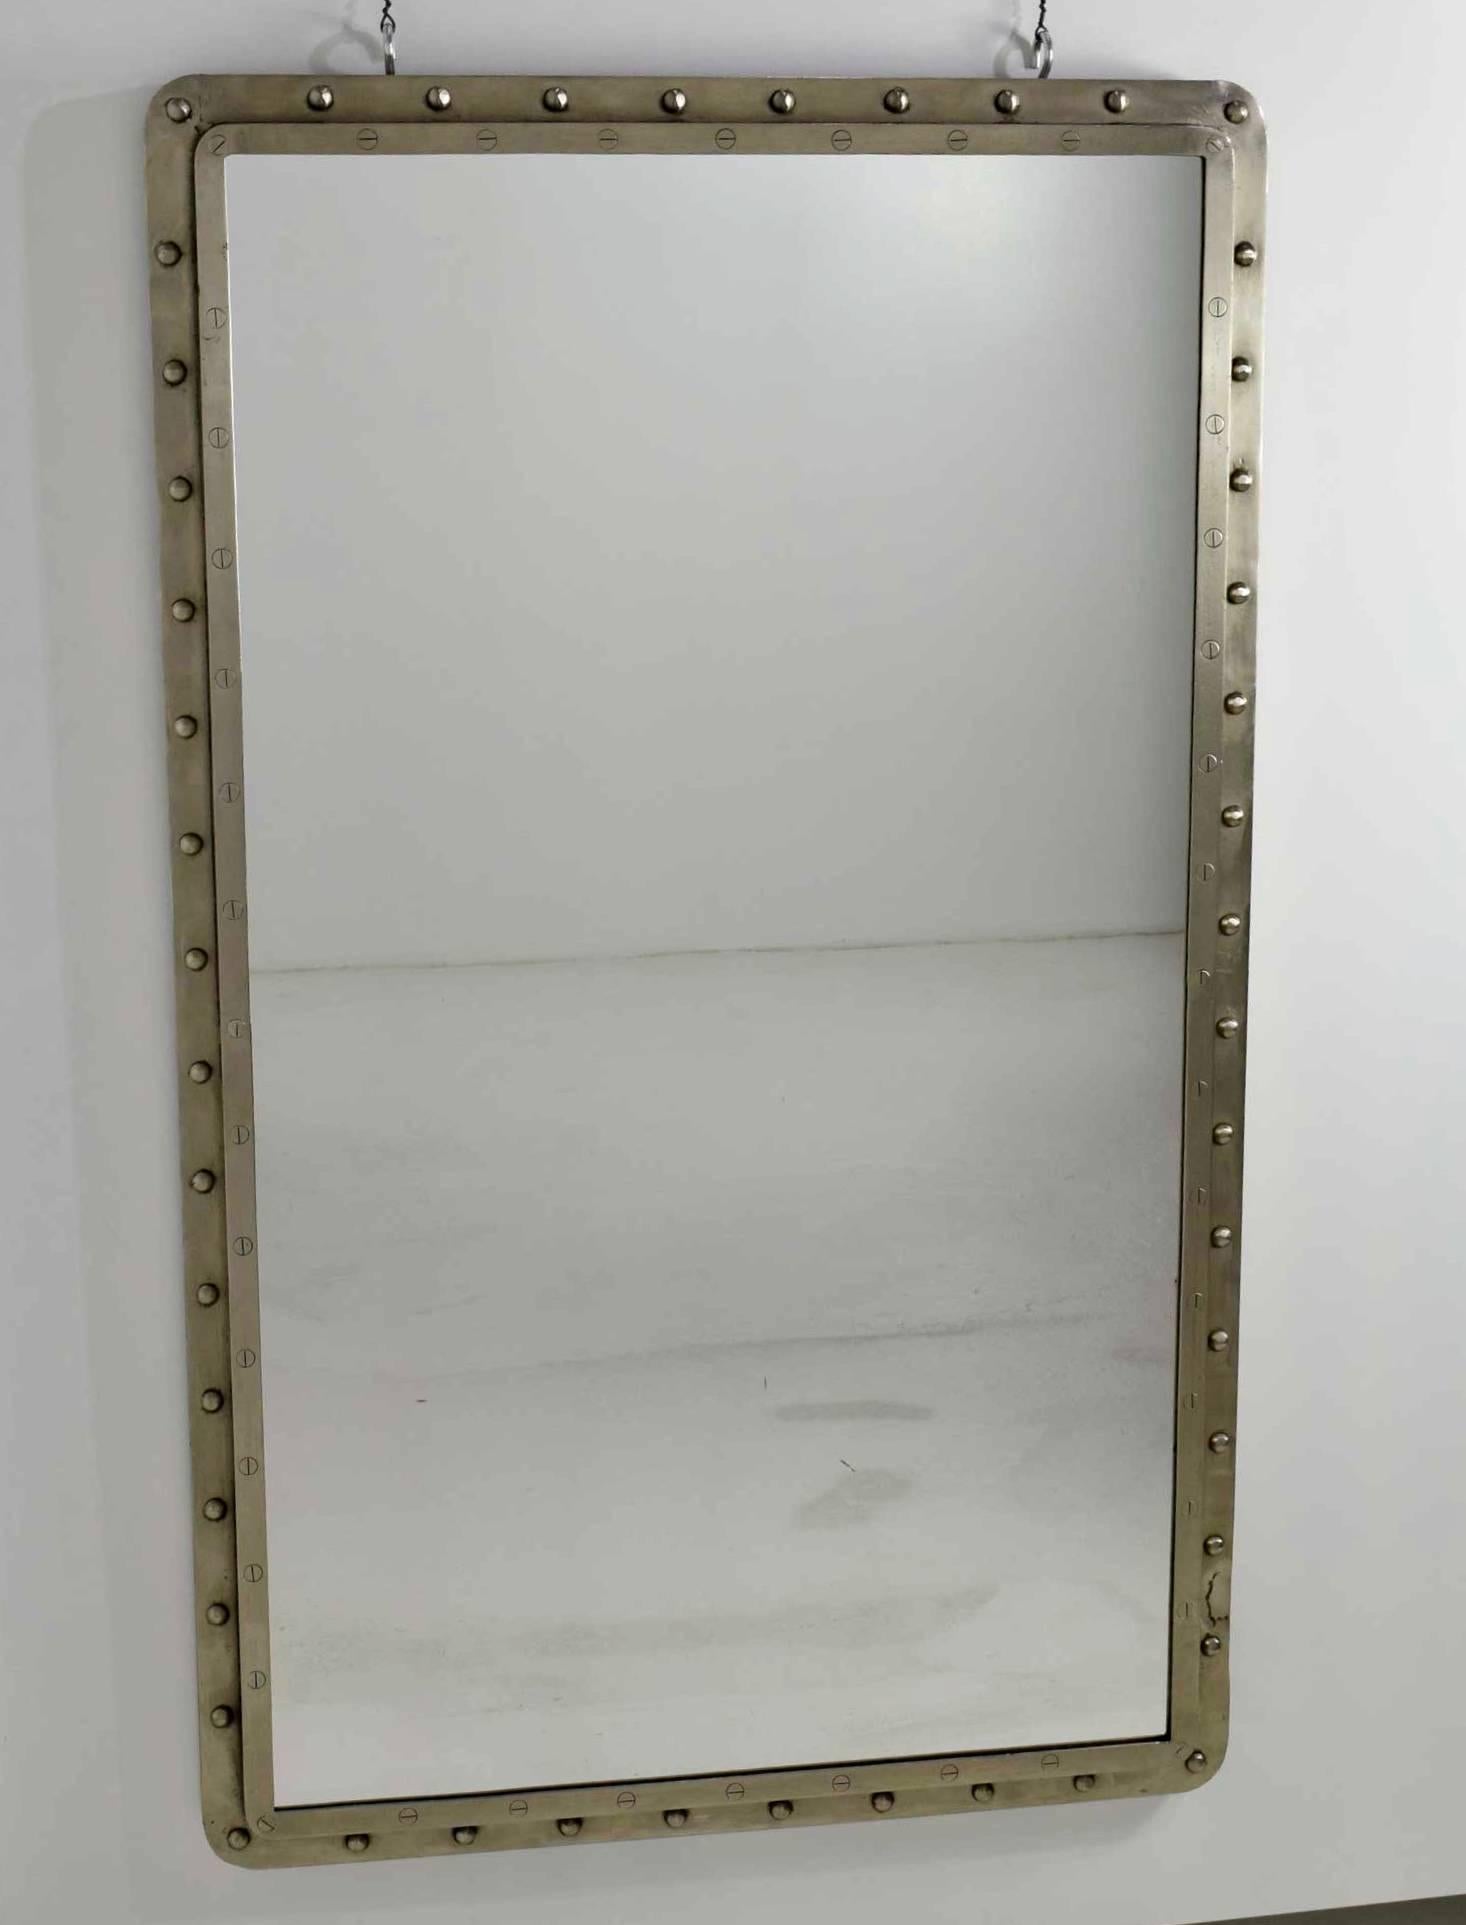 Very large Industrial style iron wall mirrors. Mirrors have rivets with screws around edge, two level frames. Brushed silver metal. Mirrors do not have rings on top, we placed there for the photo. Can be hung flat against a wall either horizontally